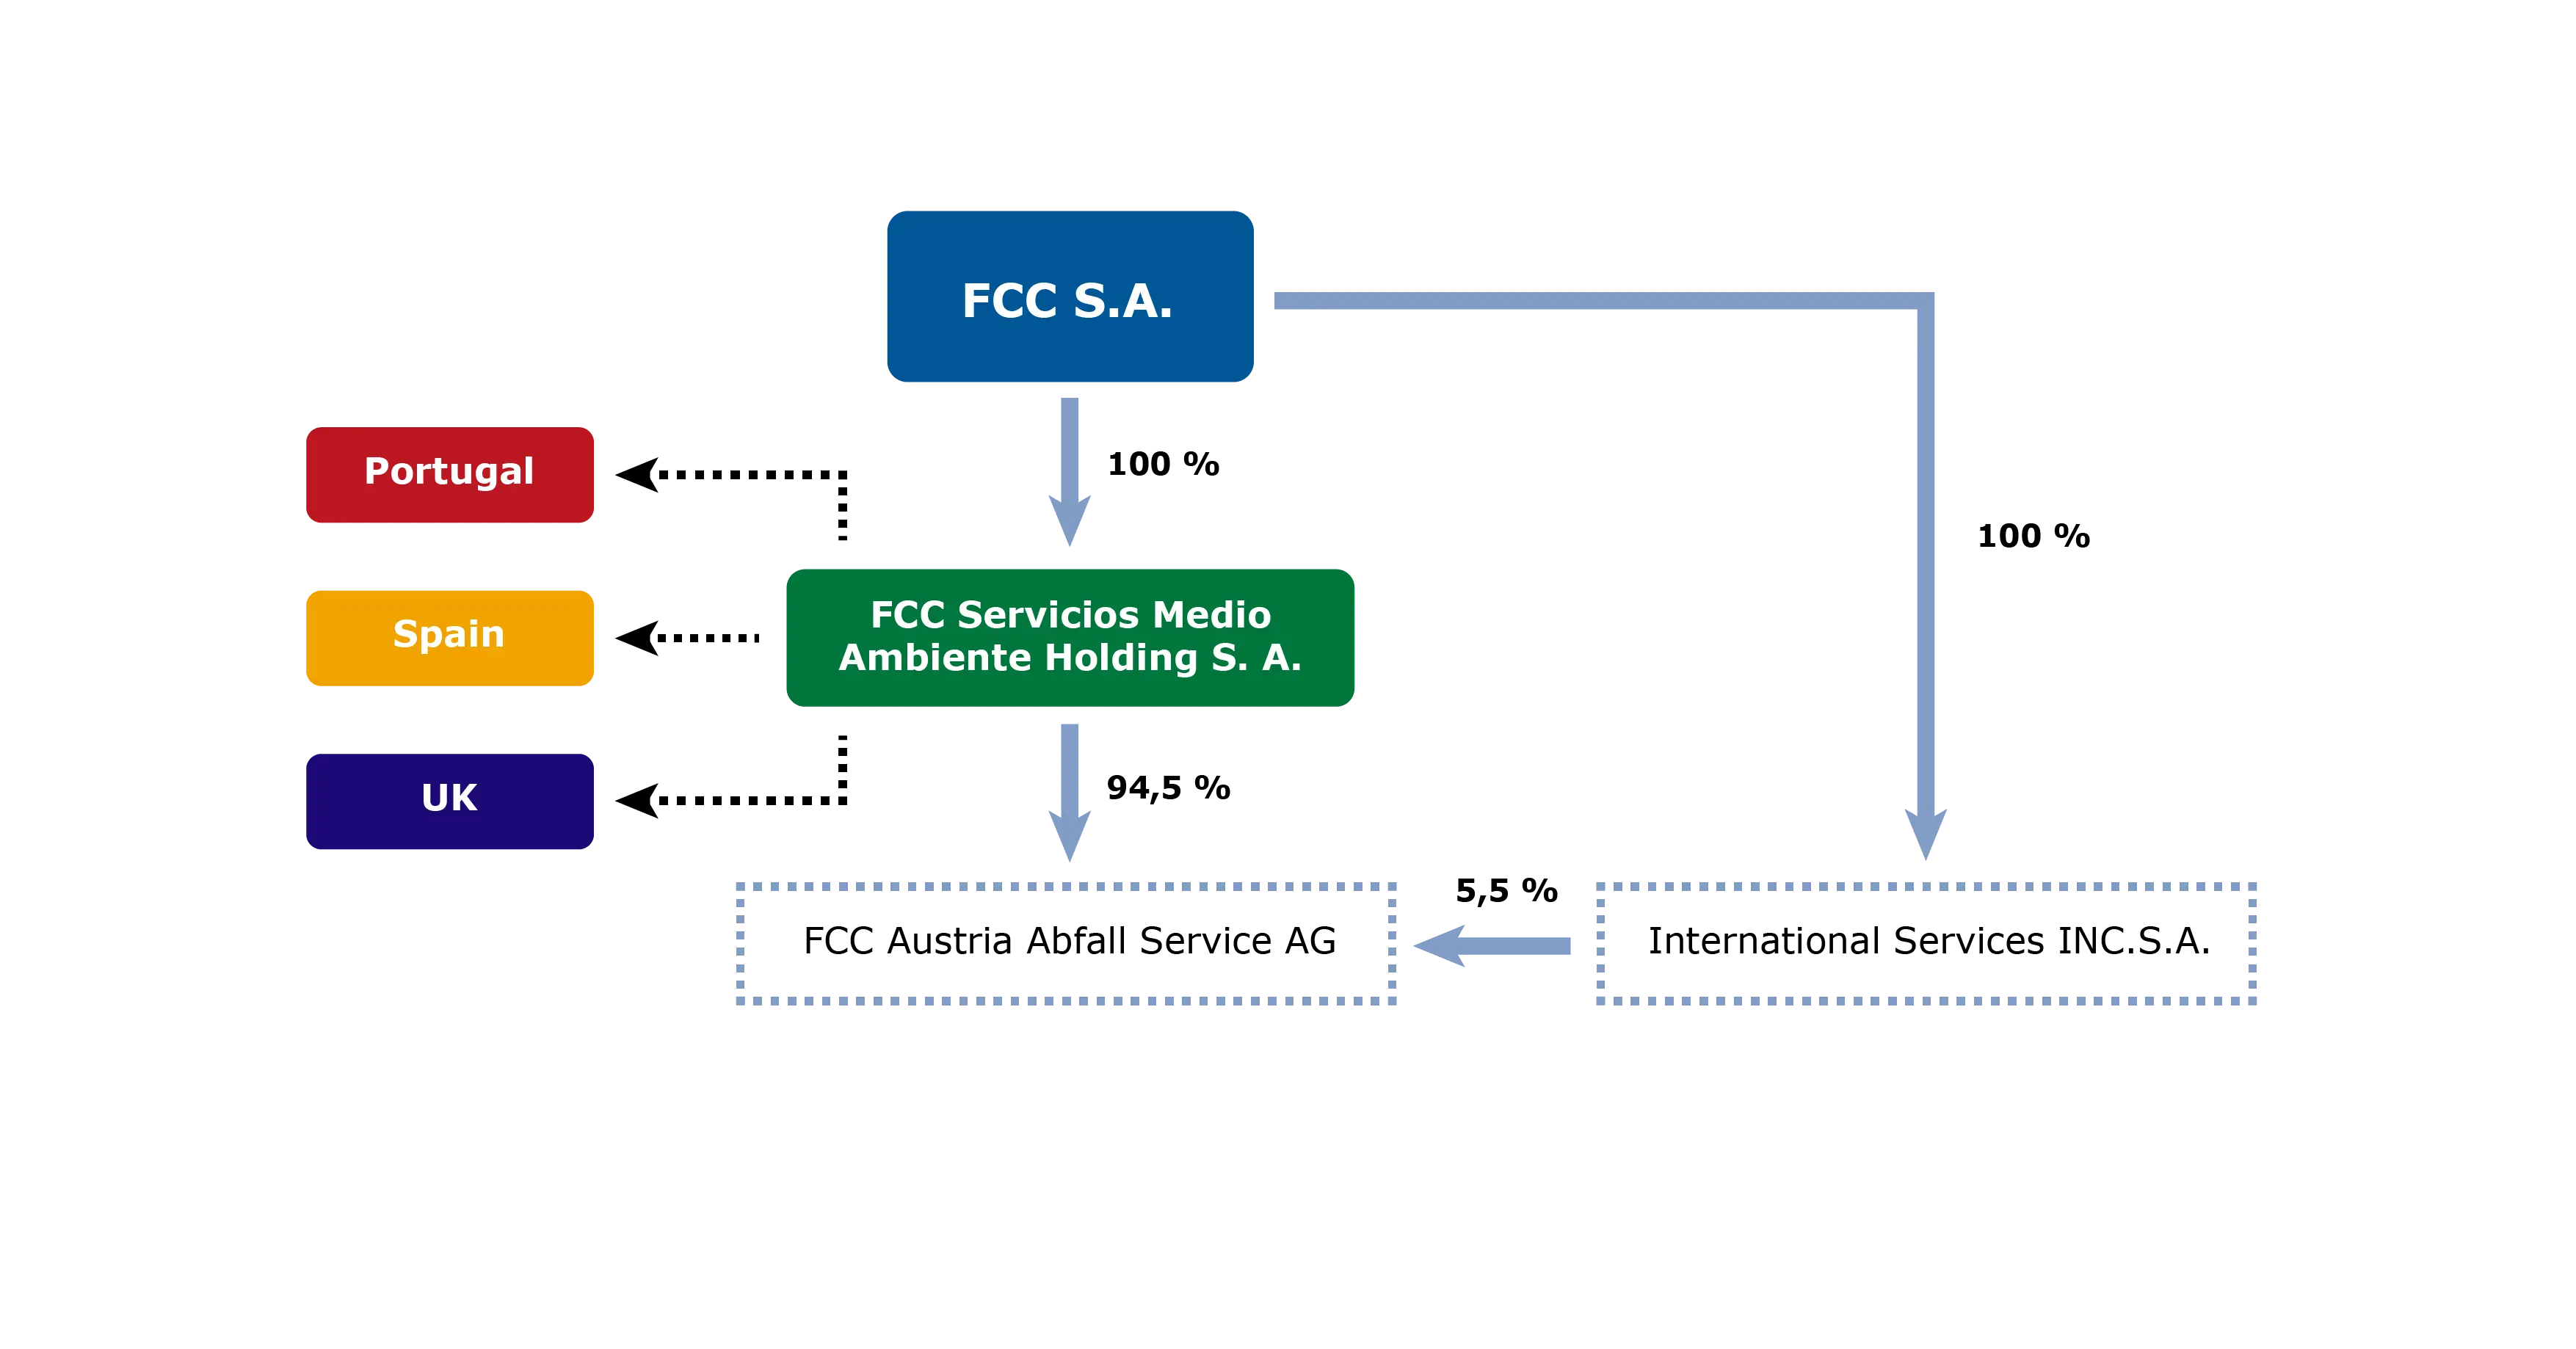 fcc_organisational_structure_new_cut